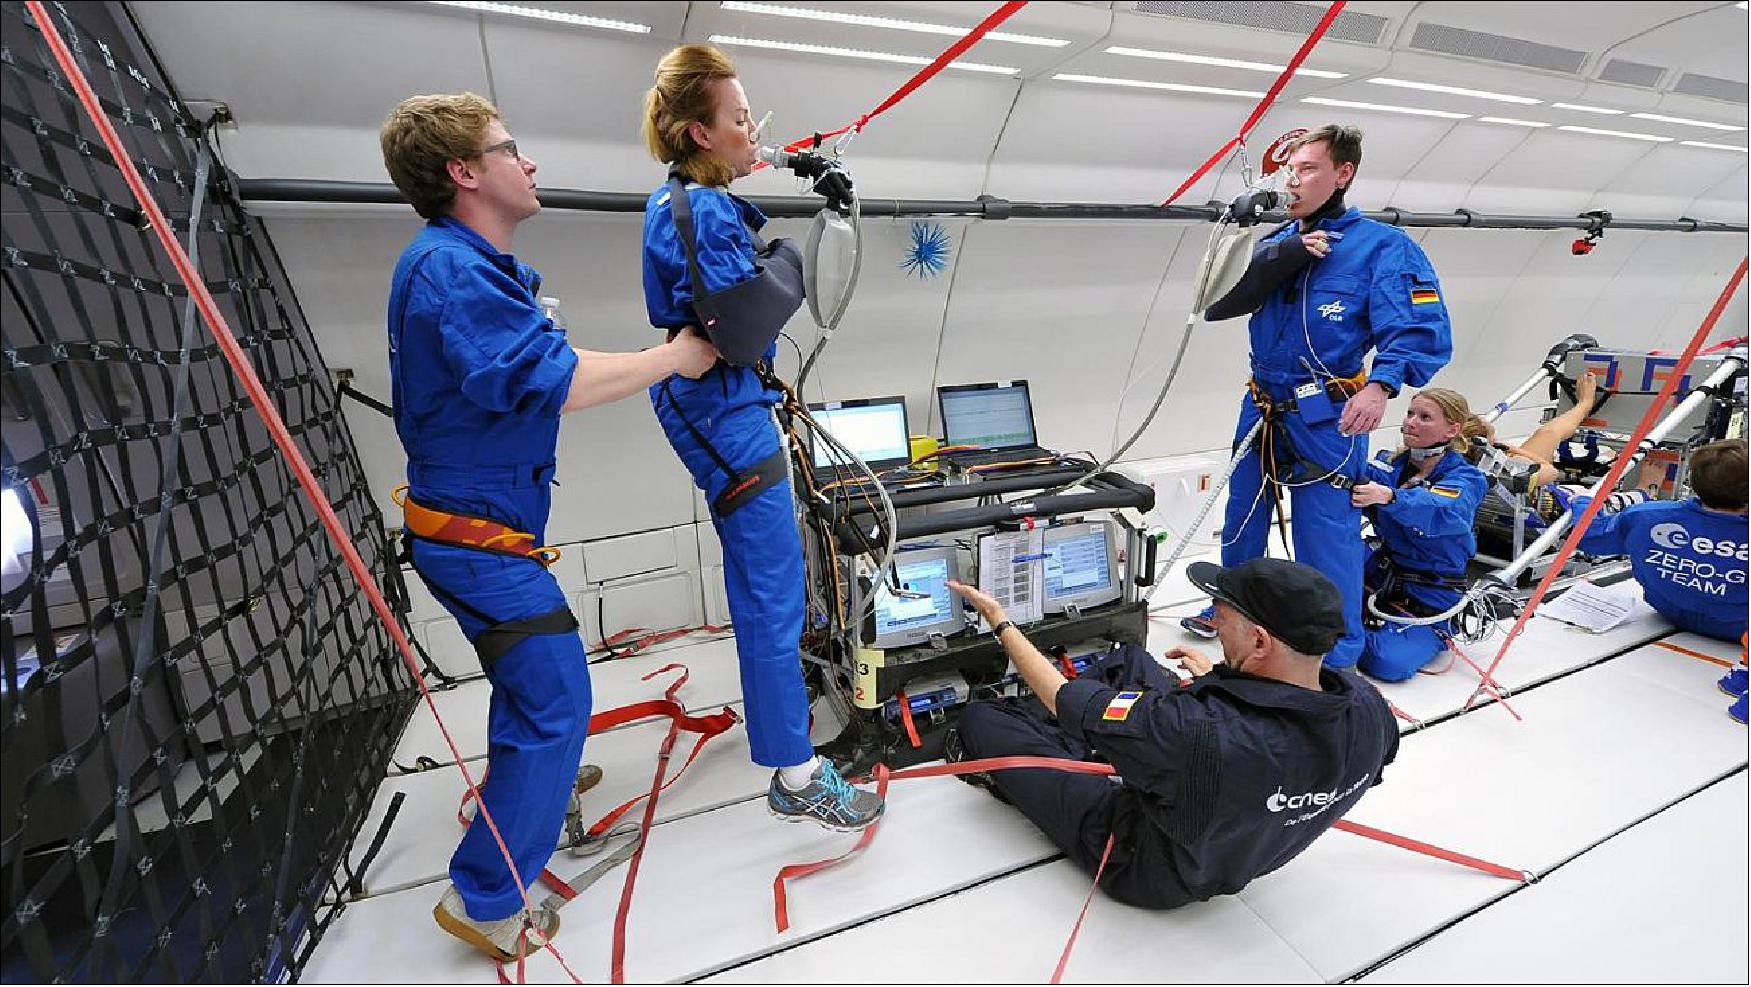 Figure 40: Photo of the cardiovascular system experiment during a parabolic 'microgravity' flight phase (image credit: DLR)